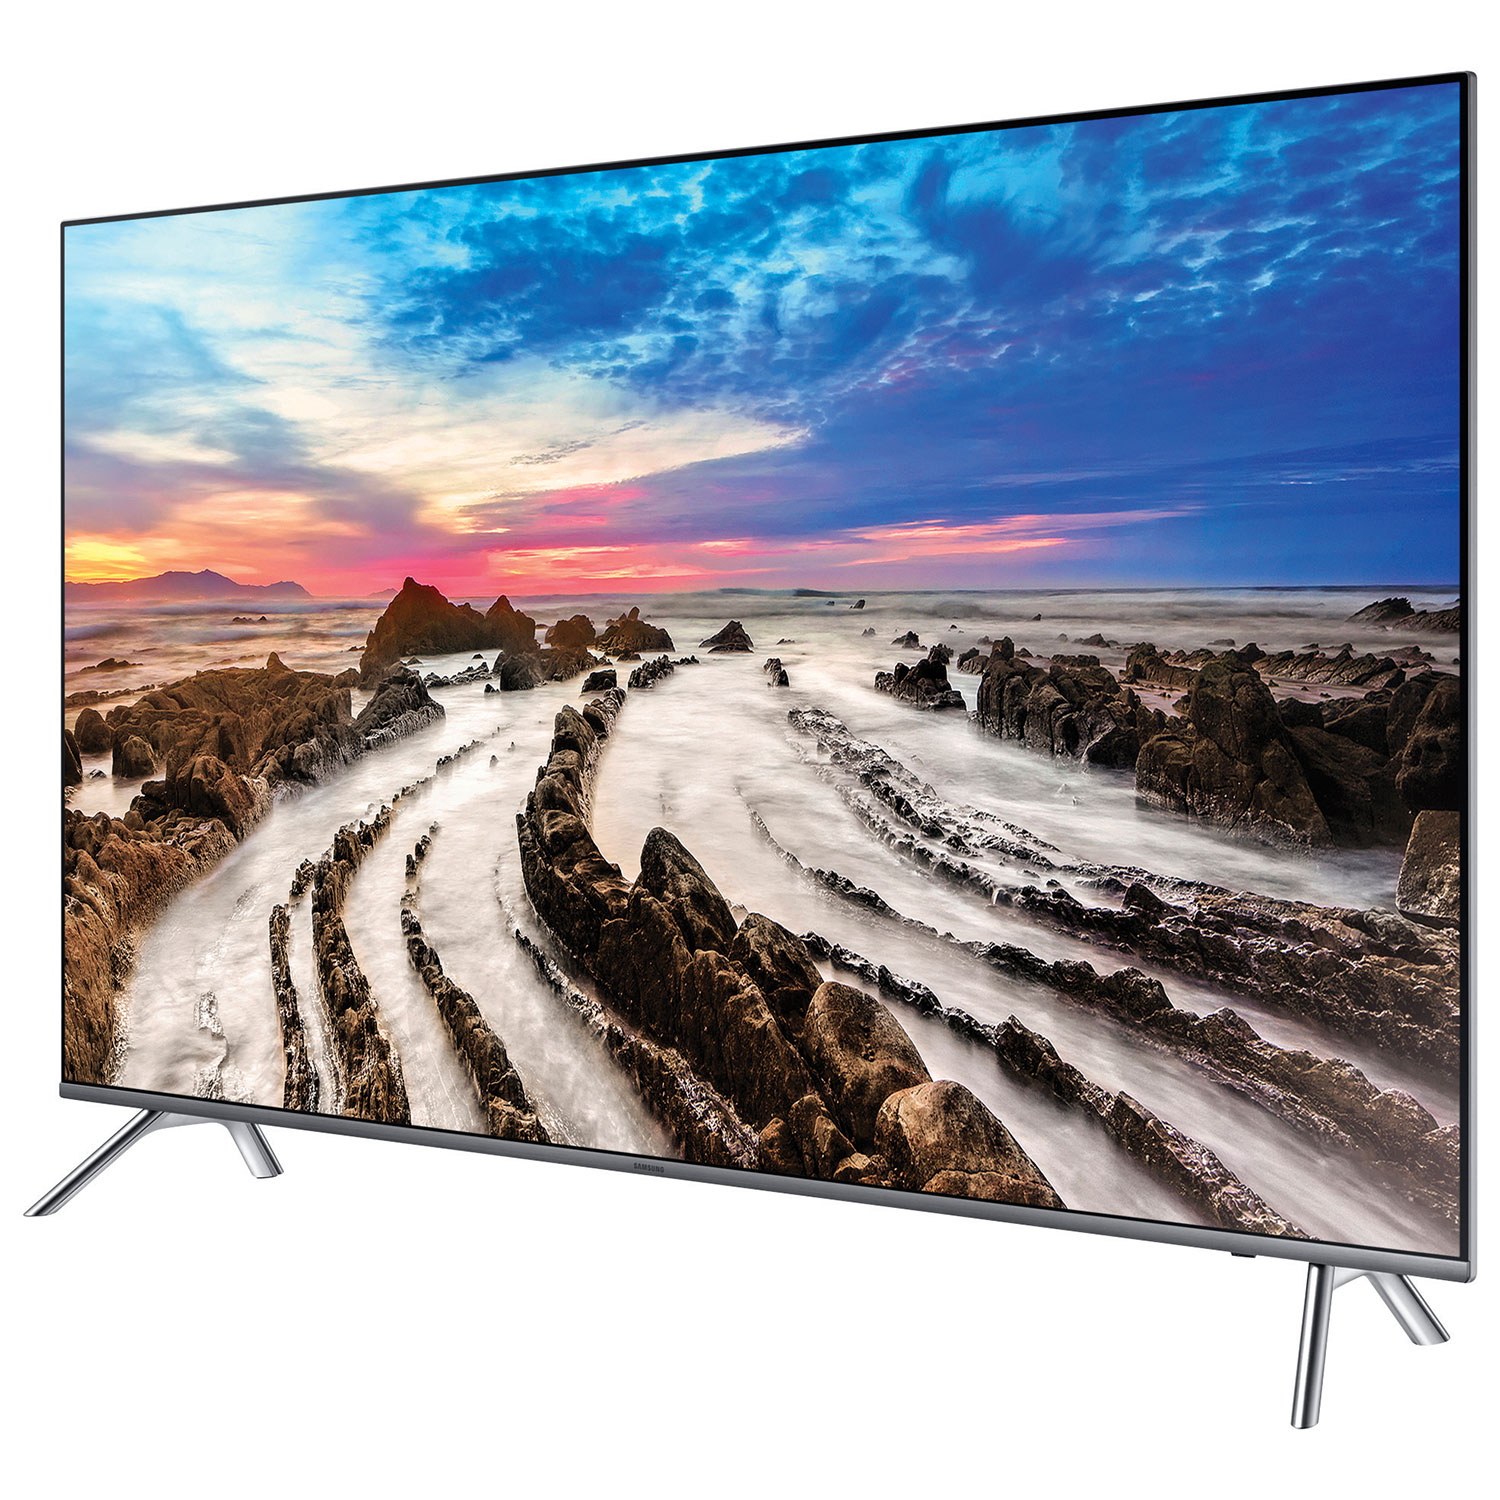 Best Buy 1793 00 Samsung Un65mu8000 65 Inch 4k Uhd Hdr Smart Led Tv Bb Pm With Xd Media Redflagdeals Com Forums